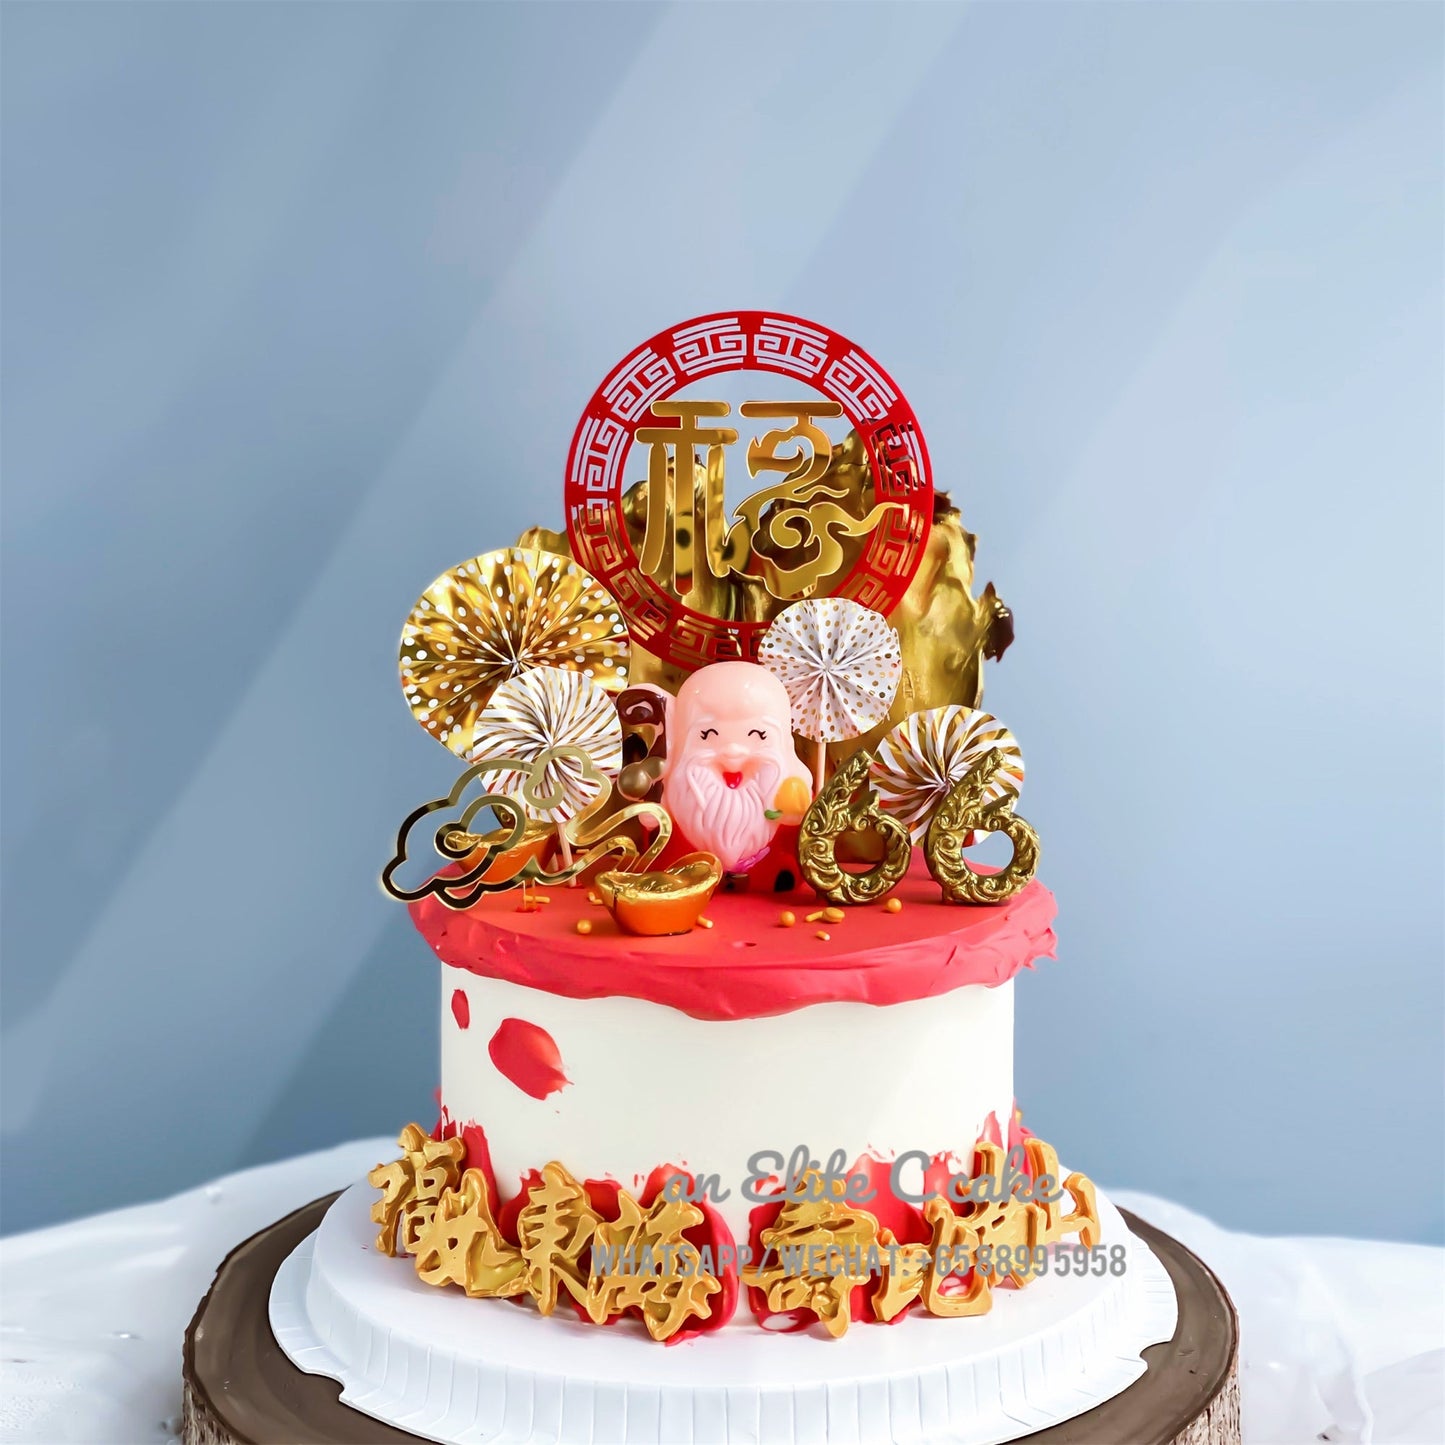 Longevity Cake for Daddy: His Ageless Affection